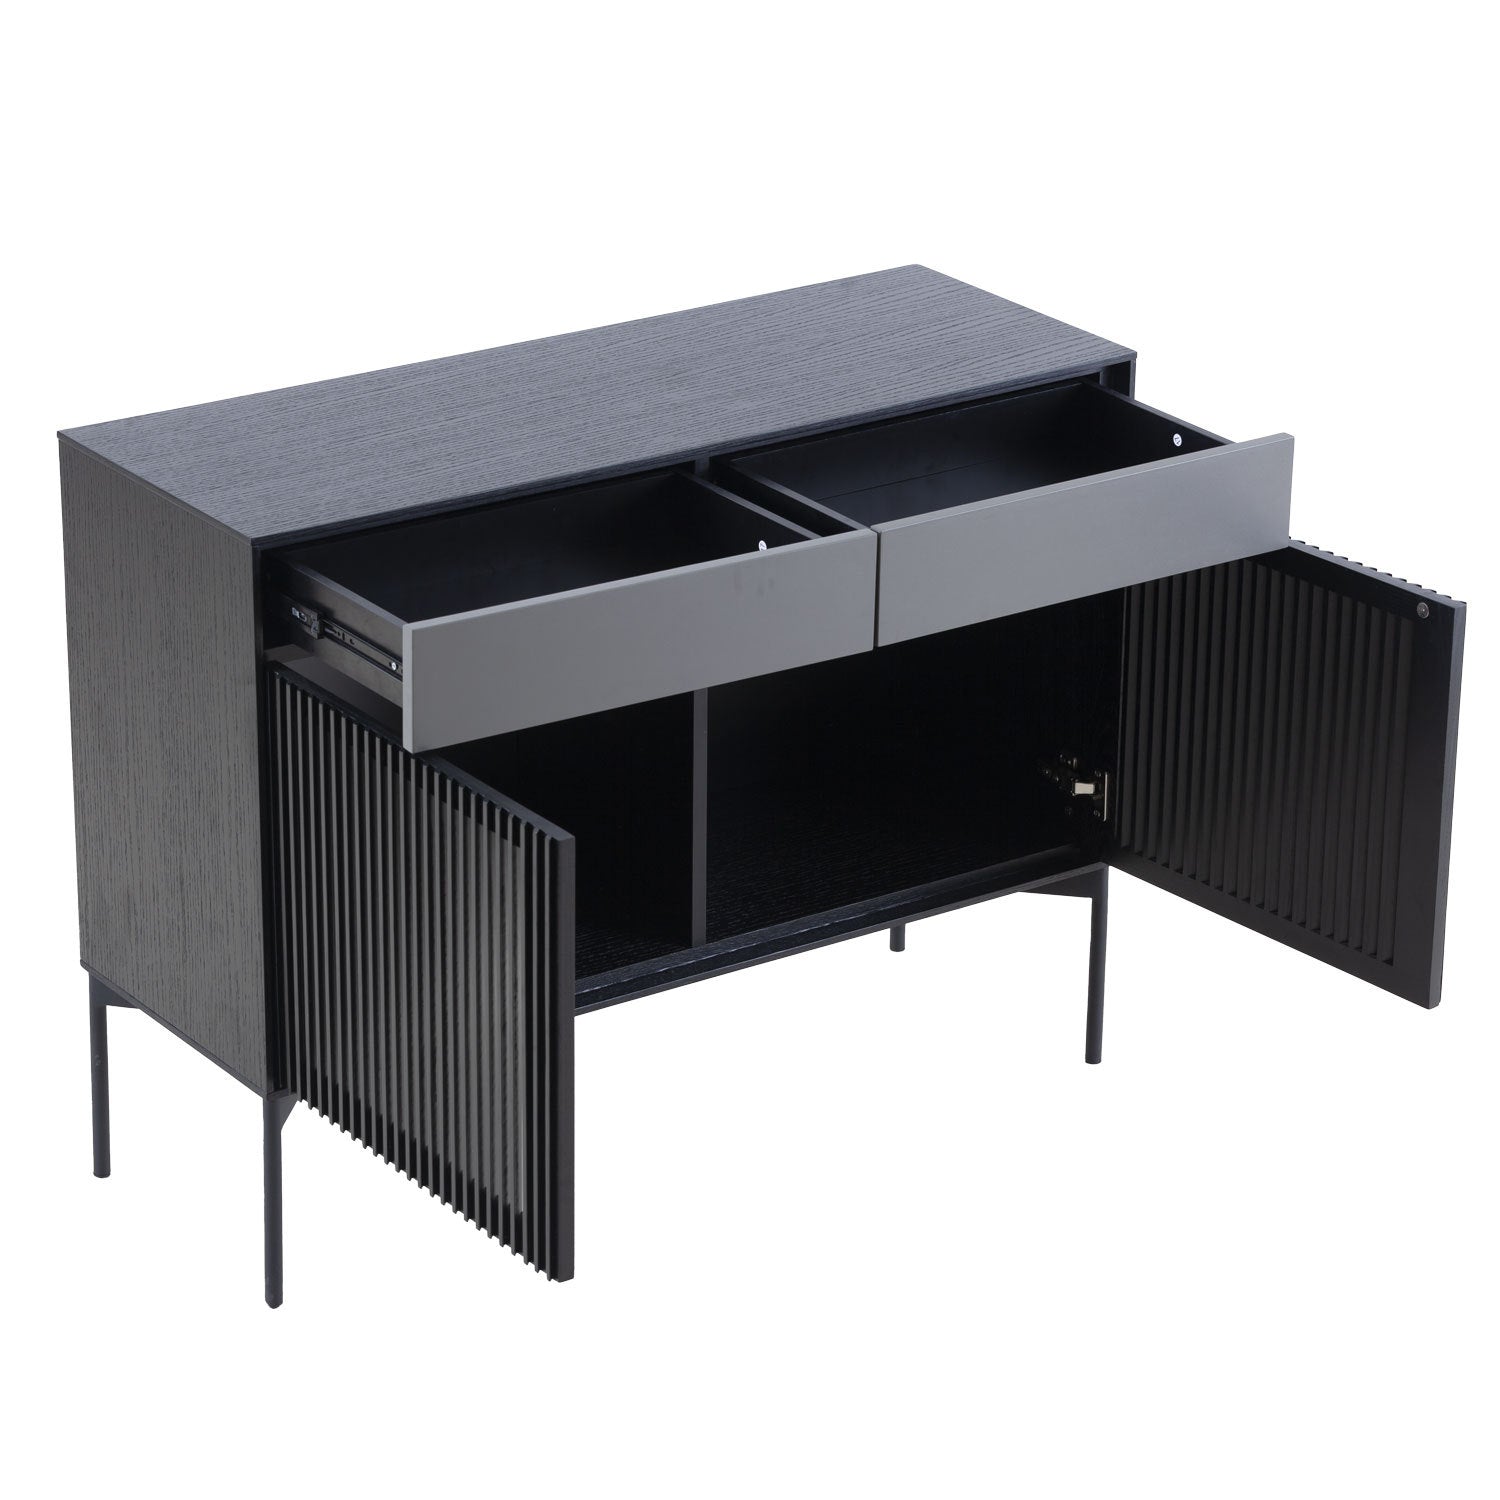 Mid Century Sideboard Cabinet Buffet Table Kitchen black-wood + stainless steel